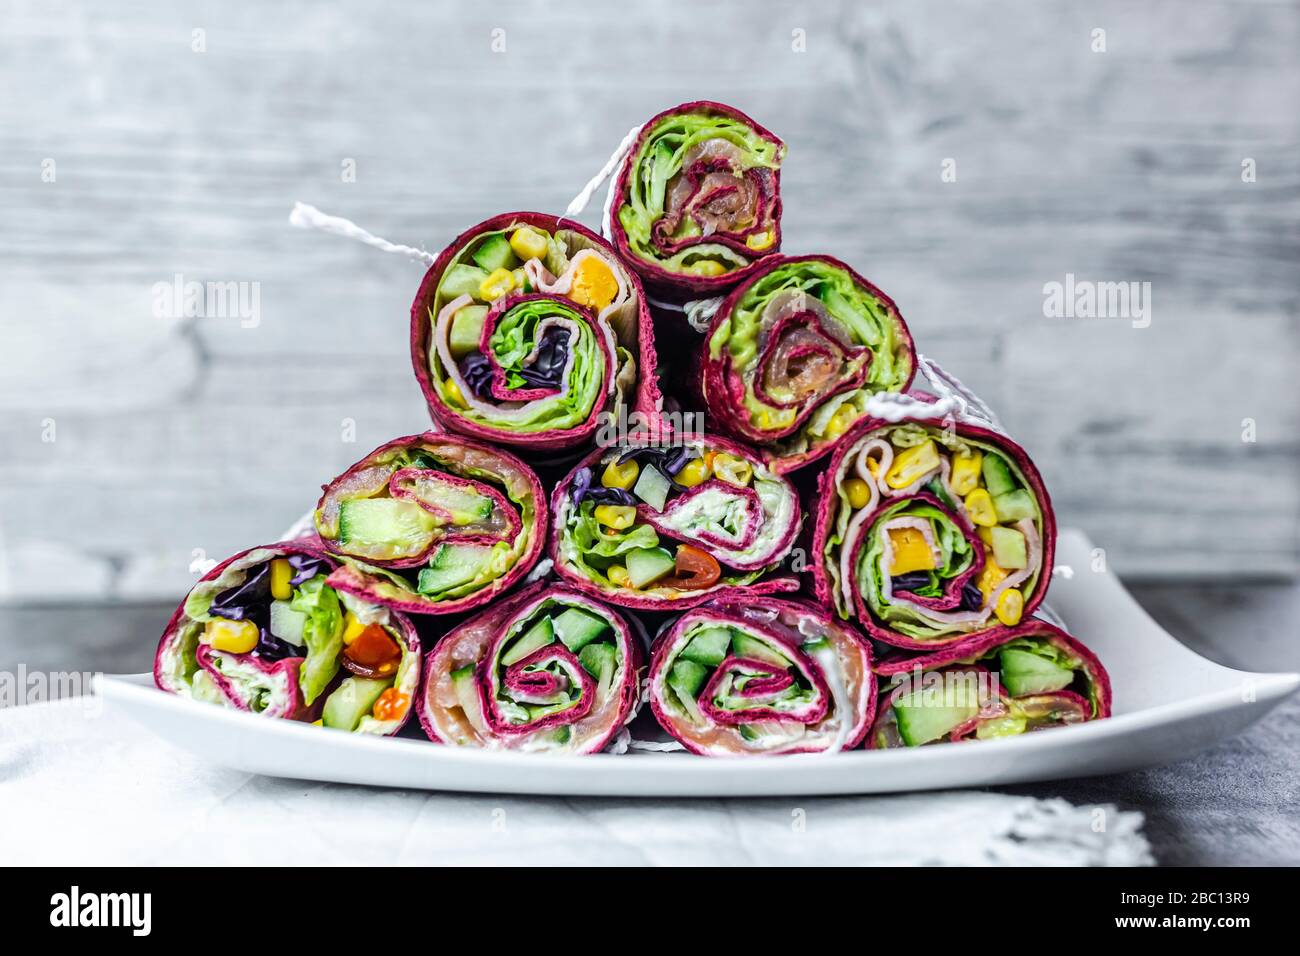 Stack of various ready-to-eat beetroot wraps Stock Photo